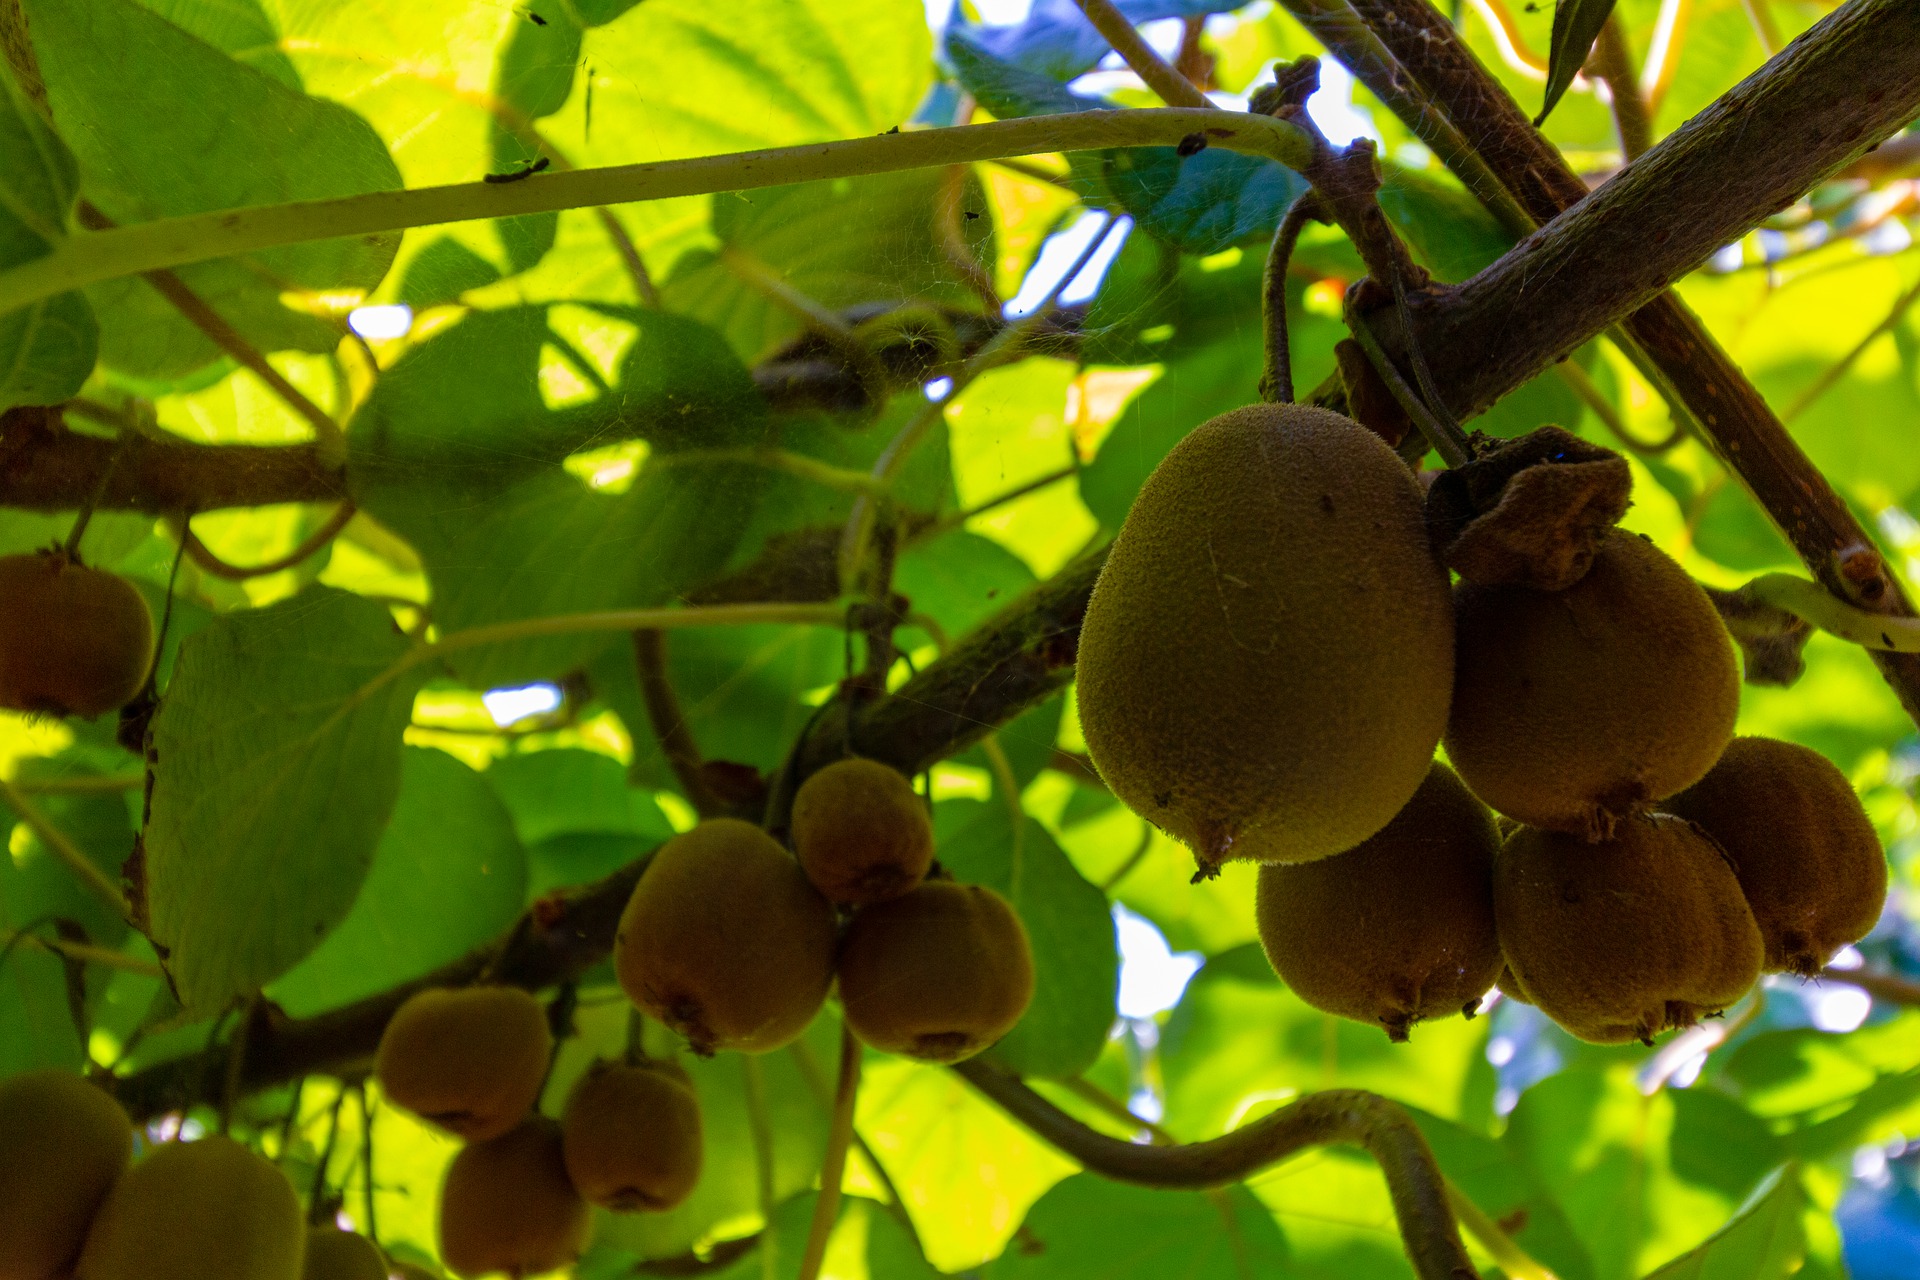 Kiwi Farming: How to Plant and Harvest